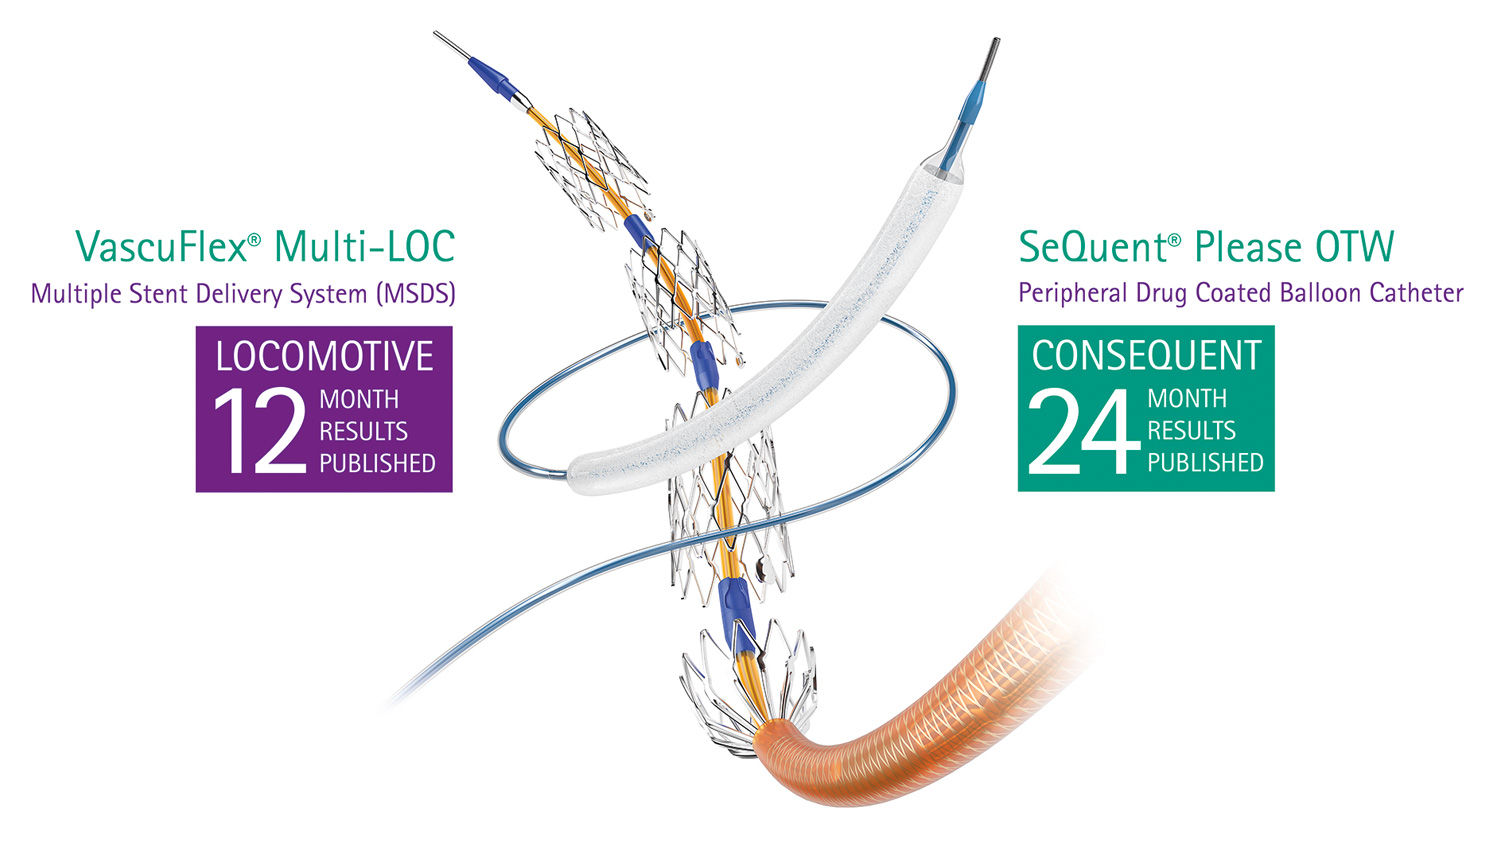 Combination therapy for endovascular procedures with VascuFlex® Multi-LOC and SeQuent® Please OTW